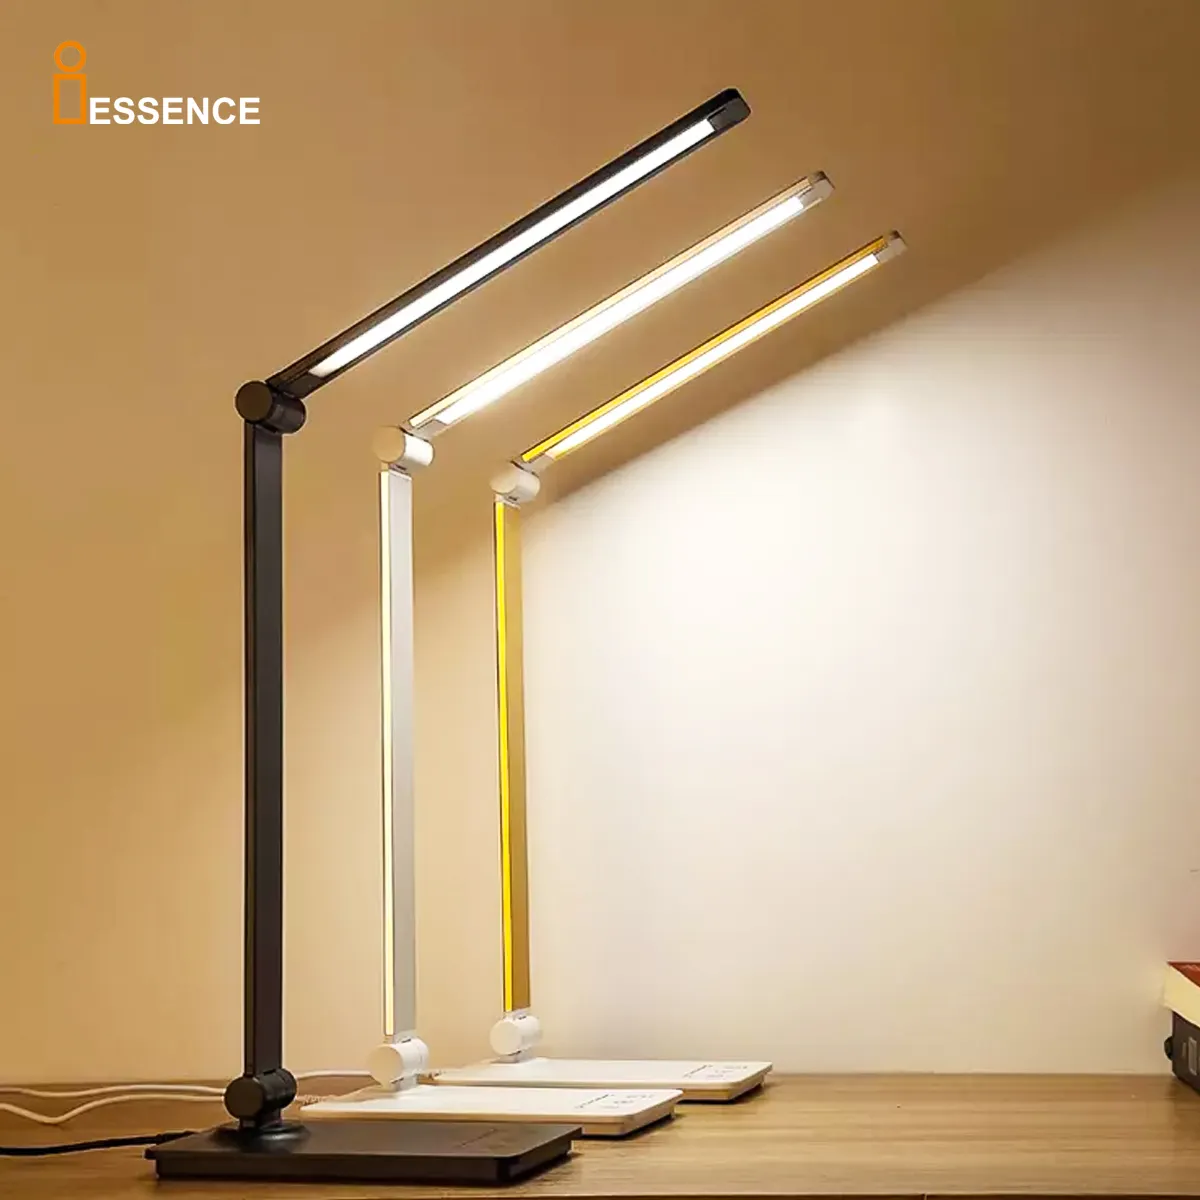 High quality folding table lamp with wireless charging USB 3500K adjustable brightness suitable for desk bedroom office study